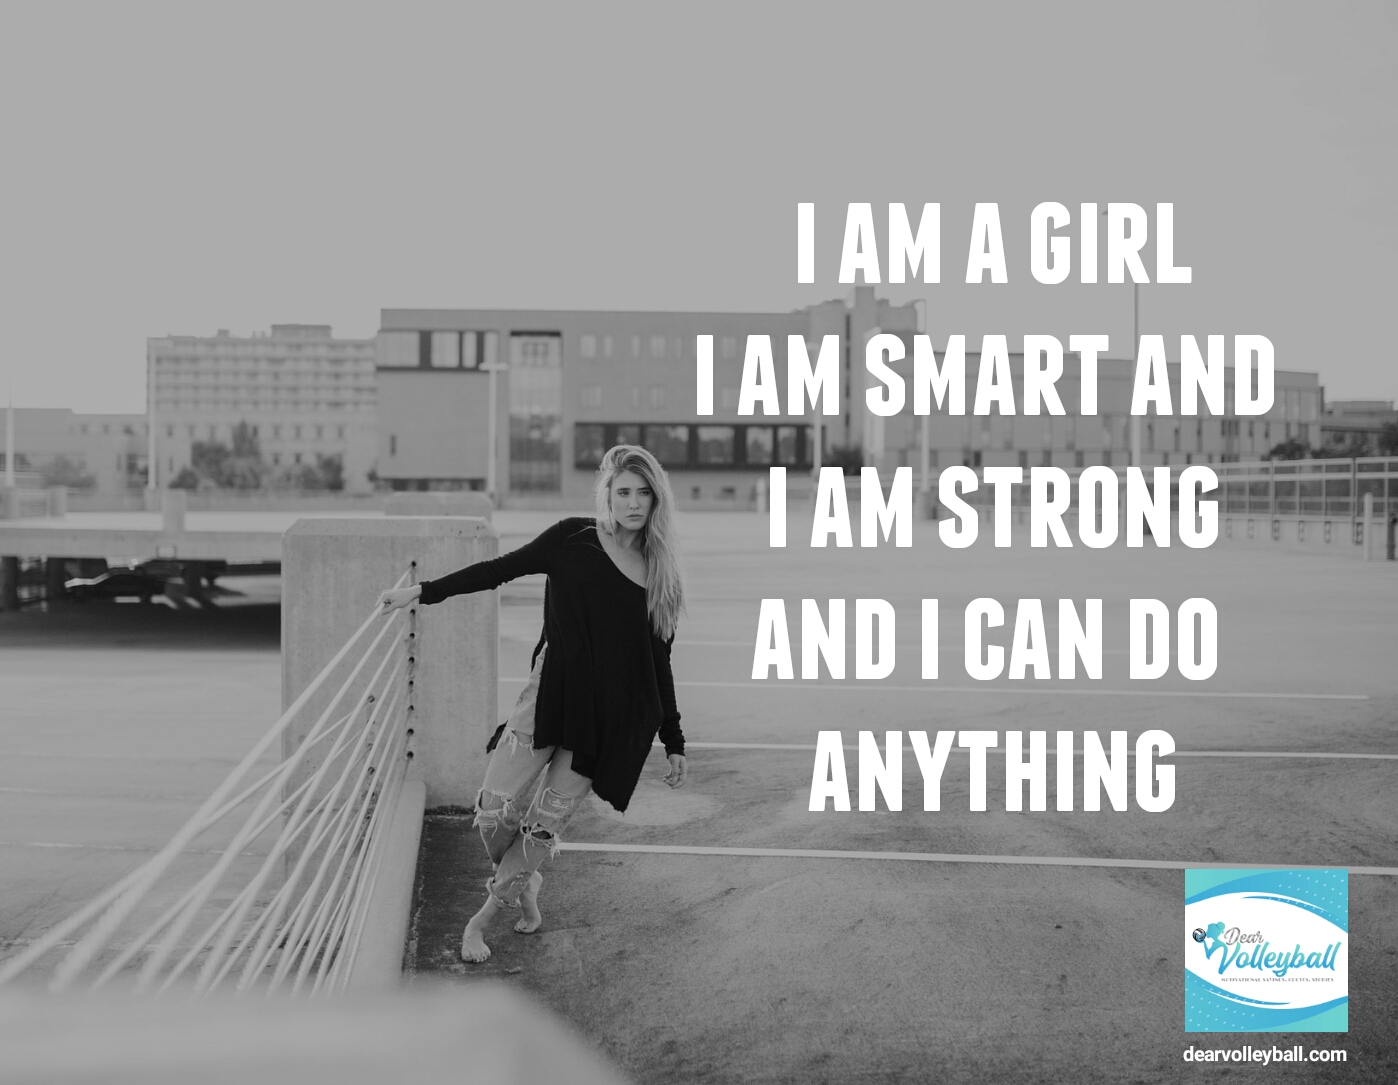 "I am a girl. I am smart and I am strong and I can do anything." and other strong girls pictures paired with an inspirational volleyball quote on Dear Volleyball.com.